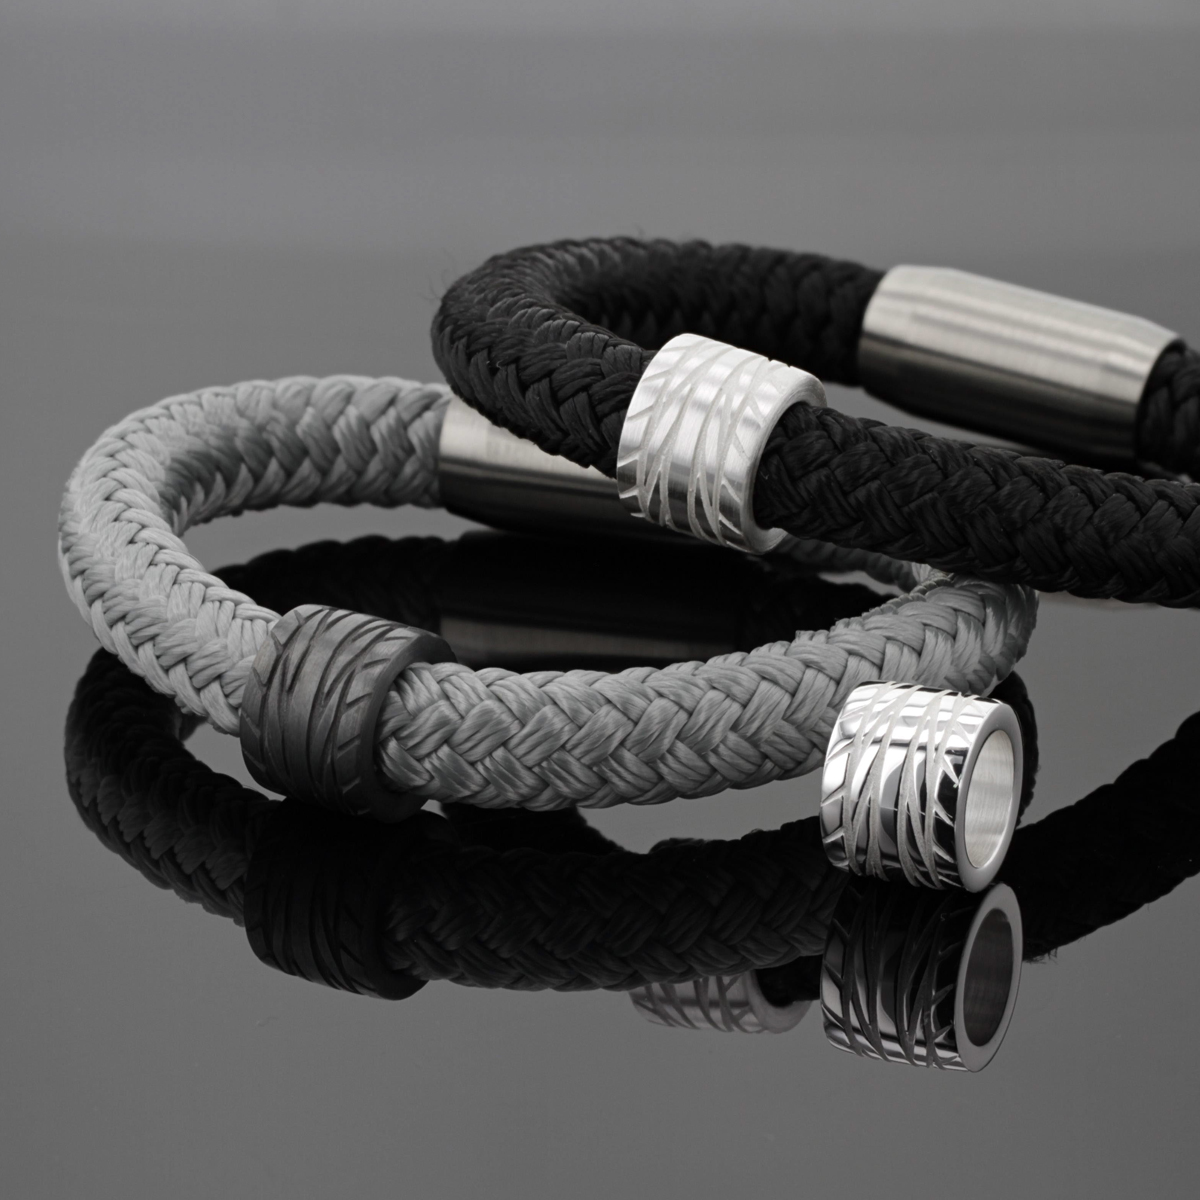 The bracelet collection for men - Mauritius